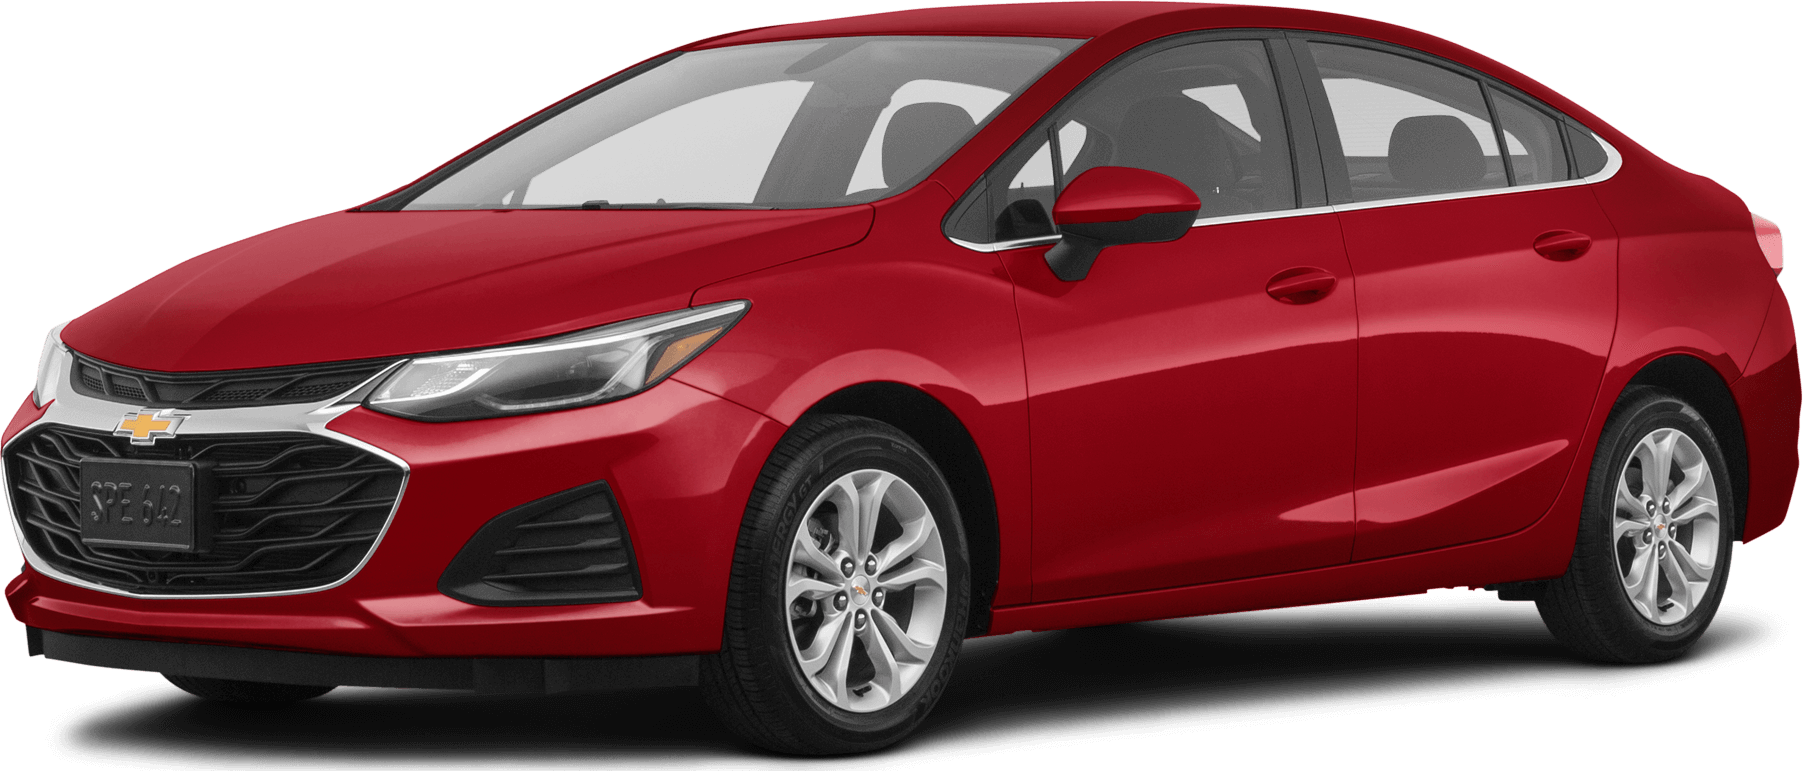 Chevrolet Cruze Background PNG Image